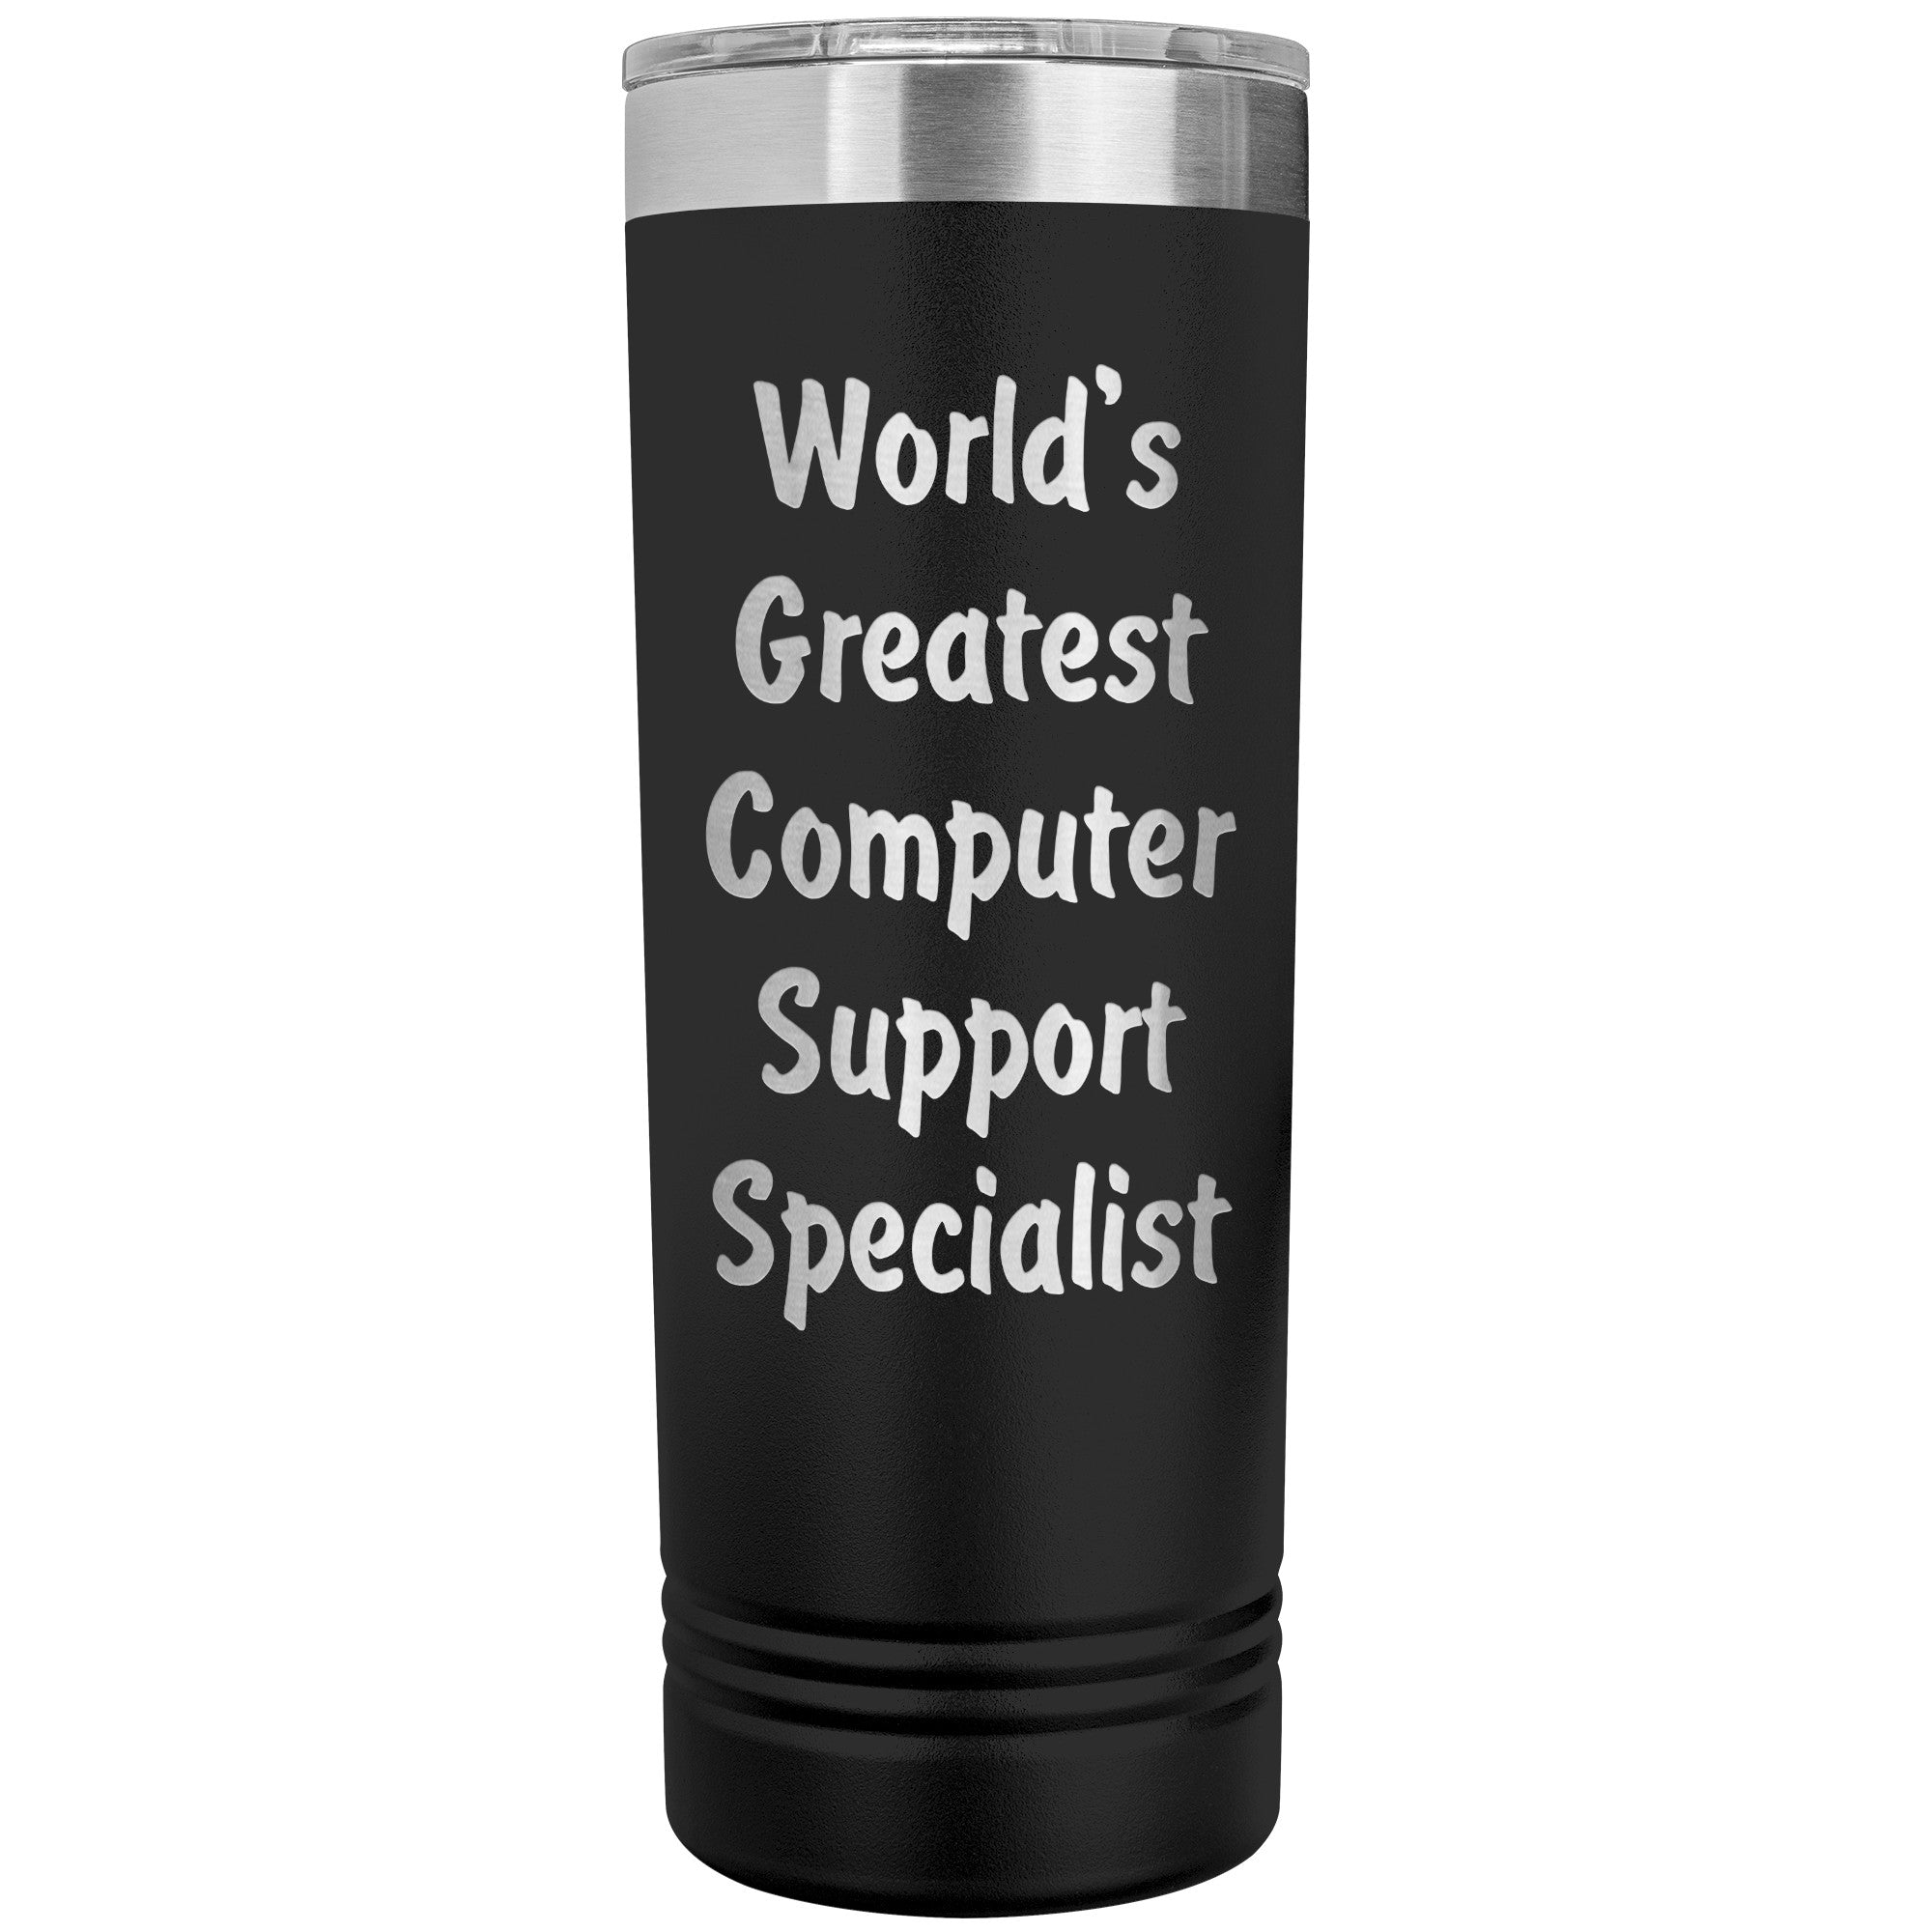 World's Greatest Computer Support Specialist - 22oz Insulated Skinny Tumbler